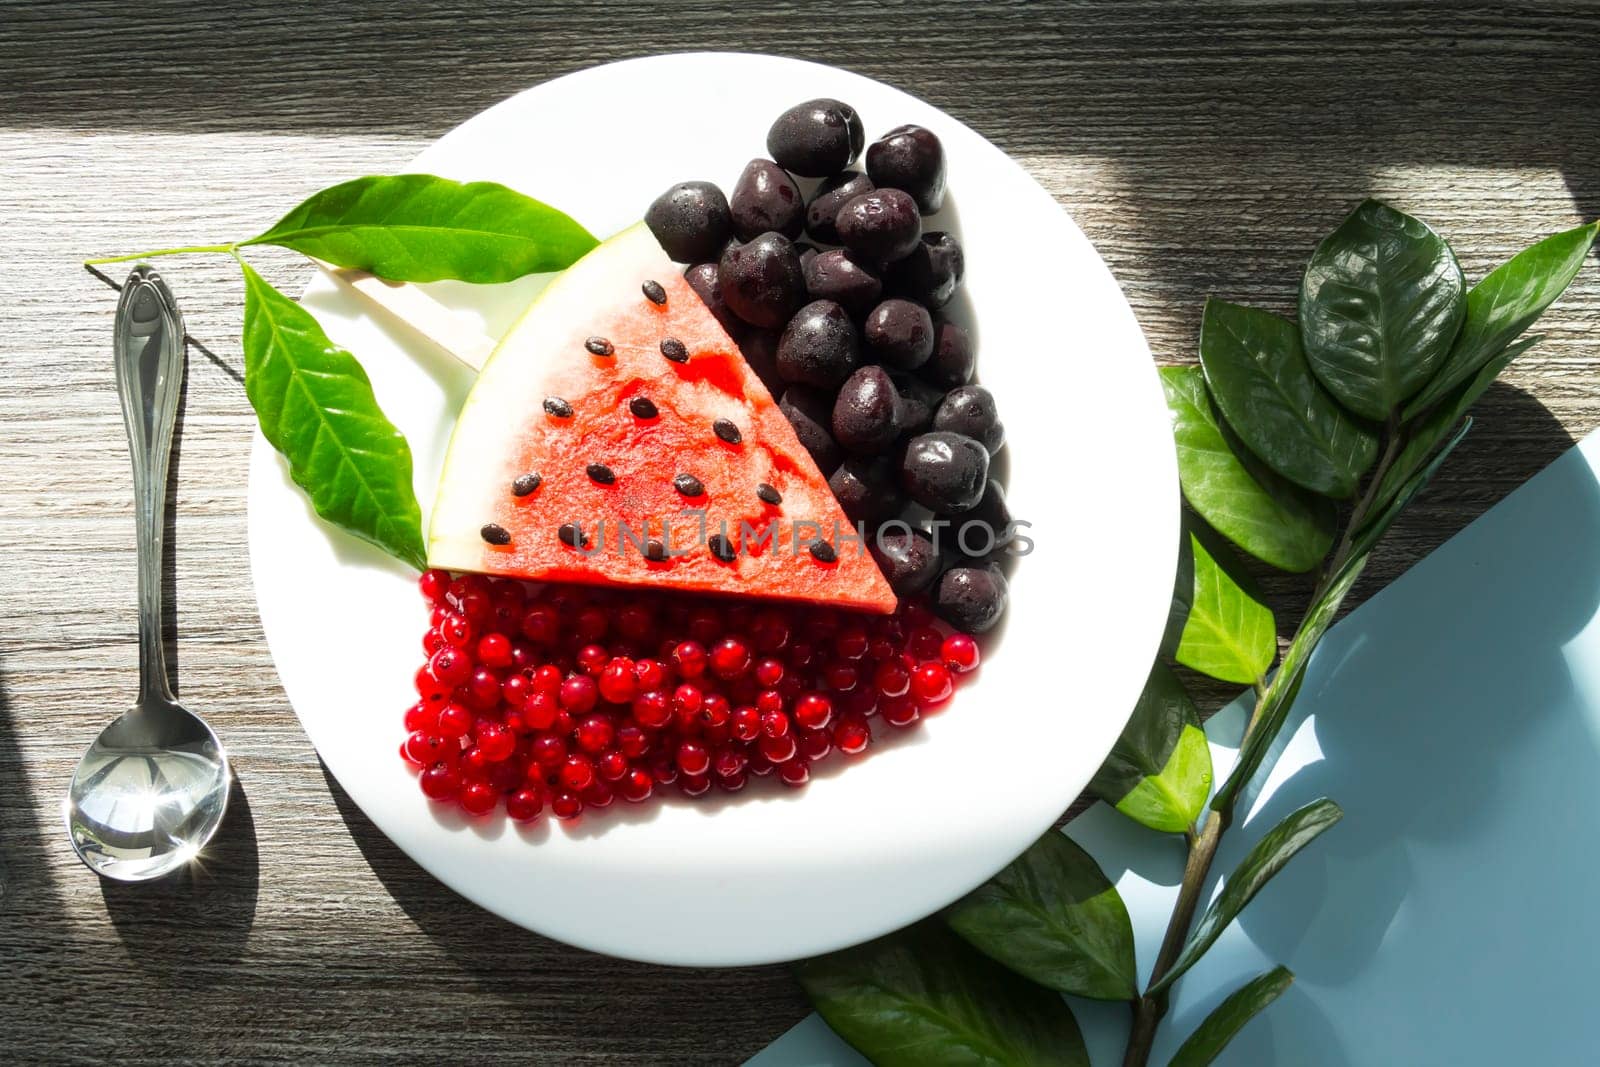 Summer snack. Fresh berries and fruits on a wooden table with green leaves of plants.